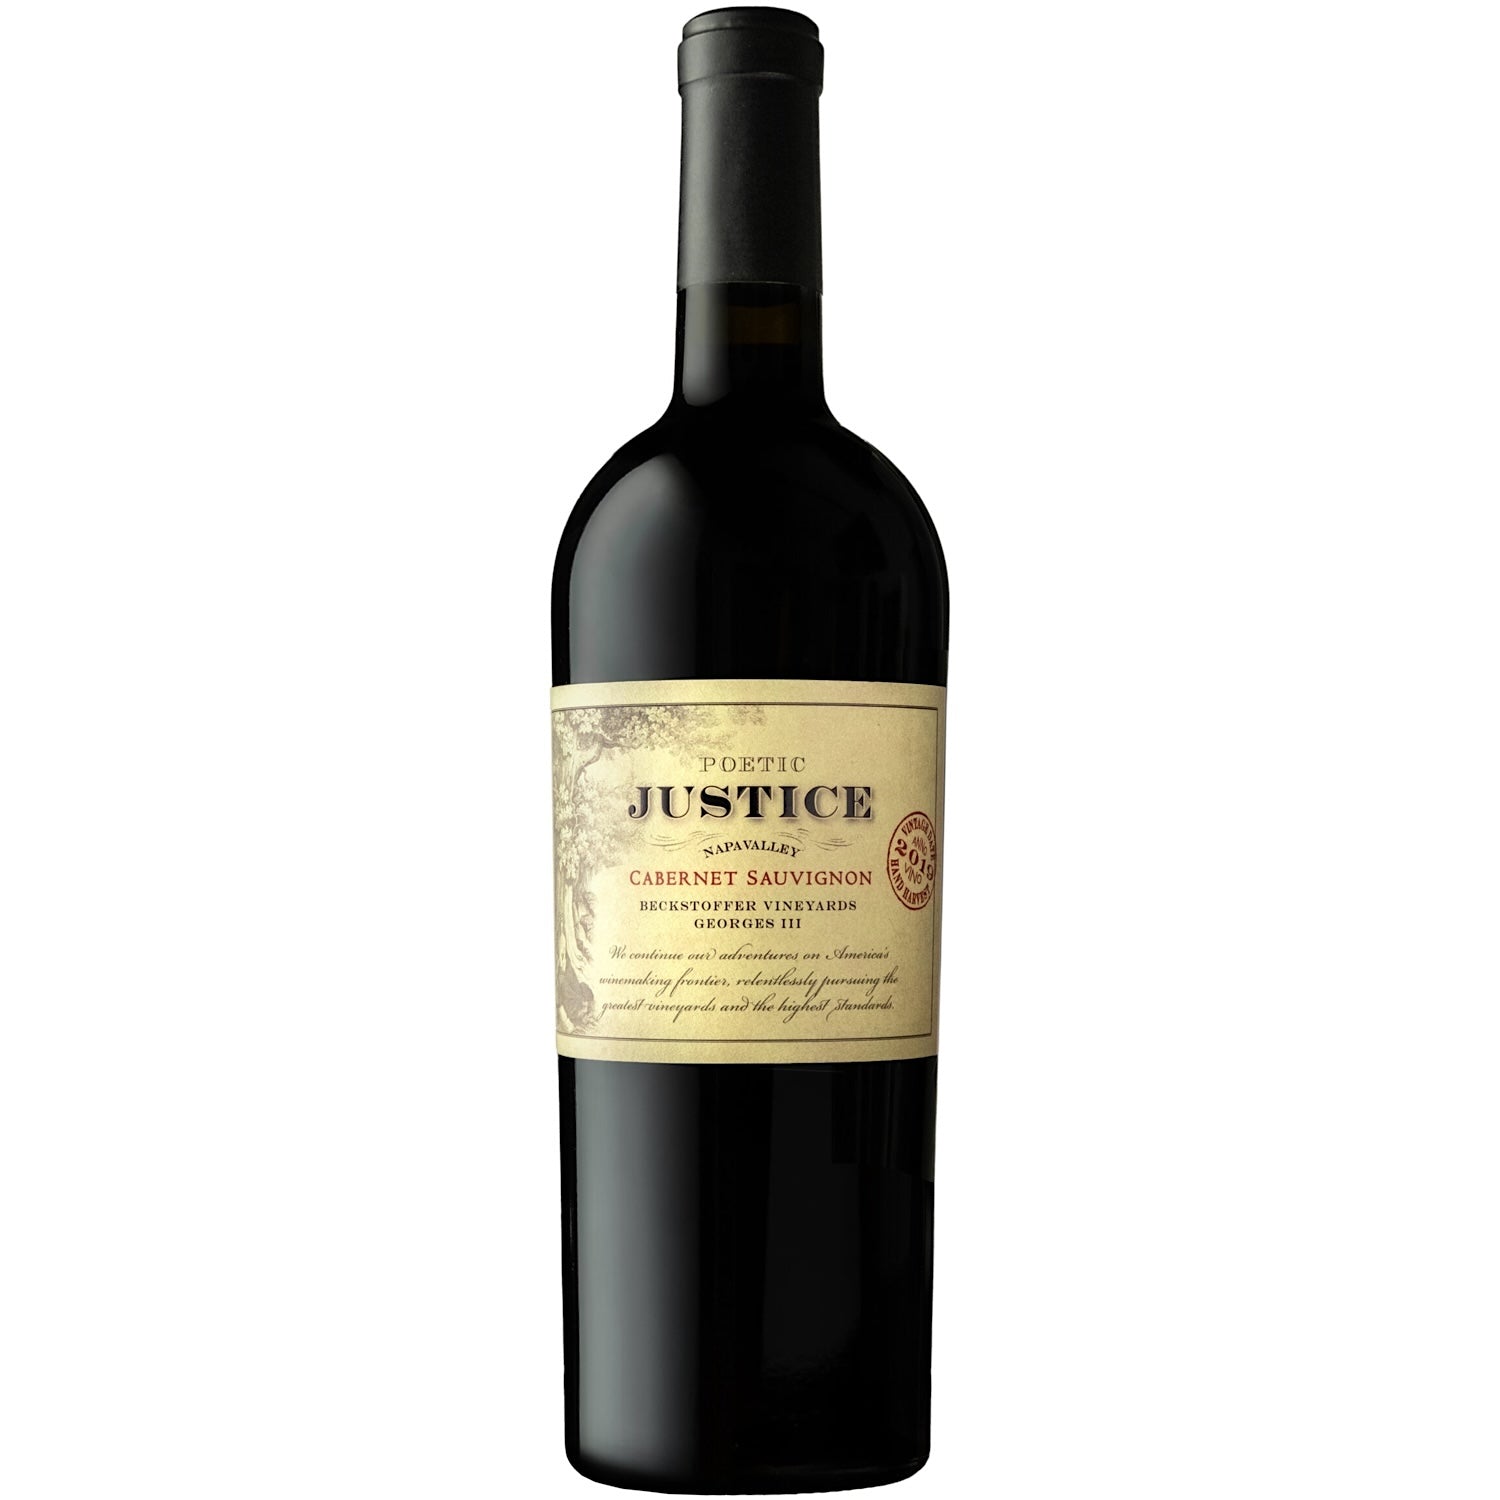 Poetic Justice Cabernet Sauvignon Becktoffer Georges III [750ml]